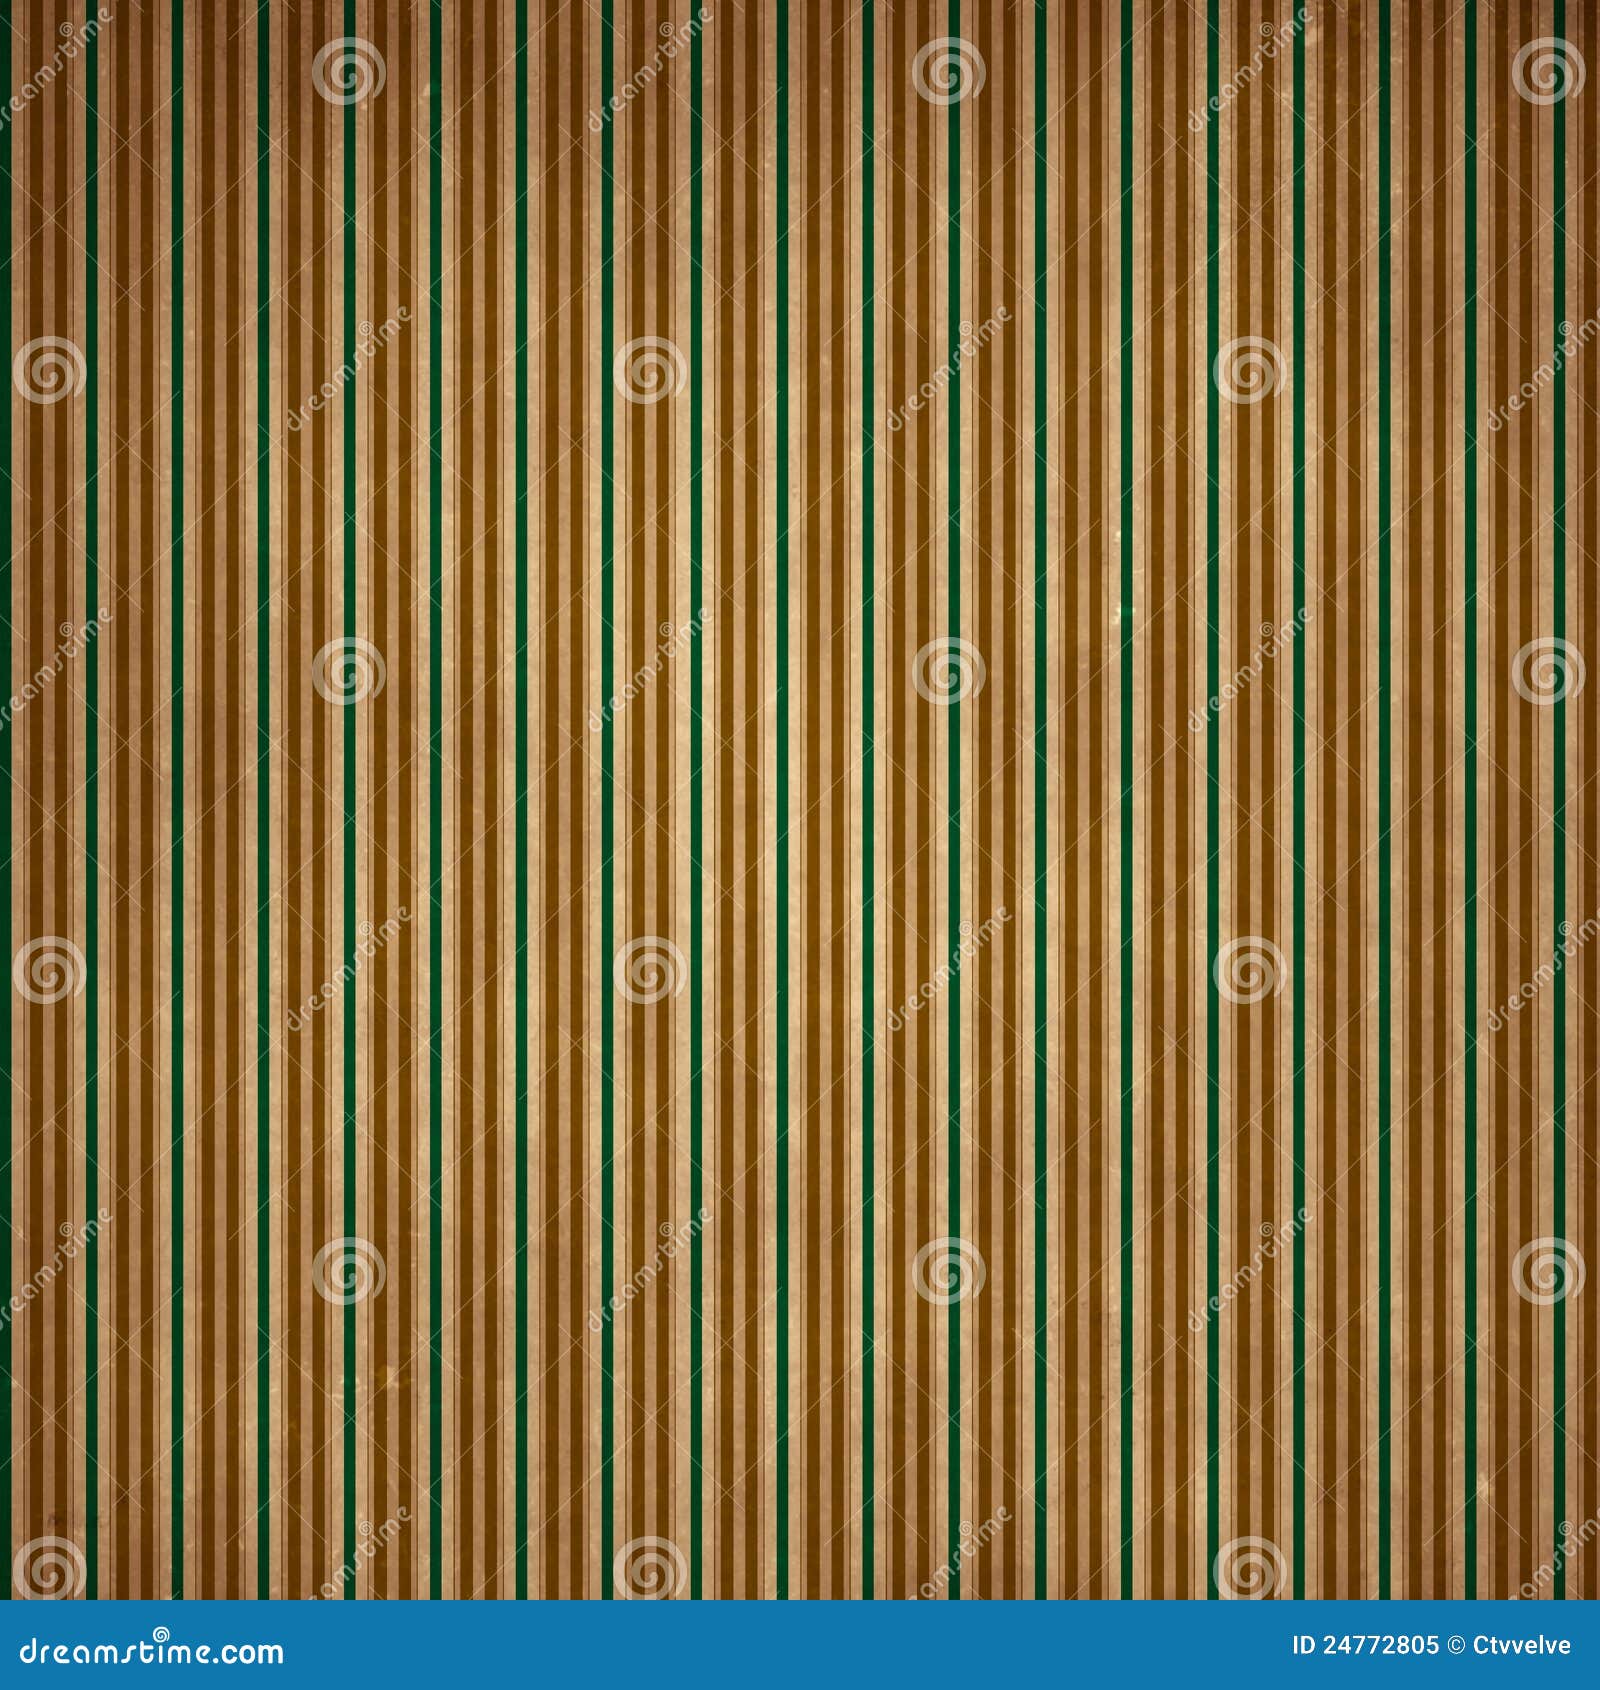 Brown And Green Grunge Background Stock Illustration - Illustration of